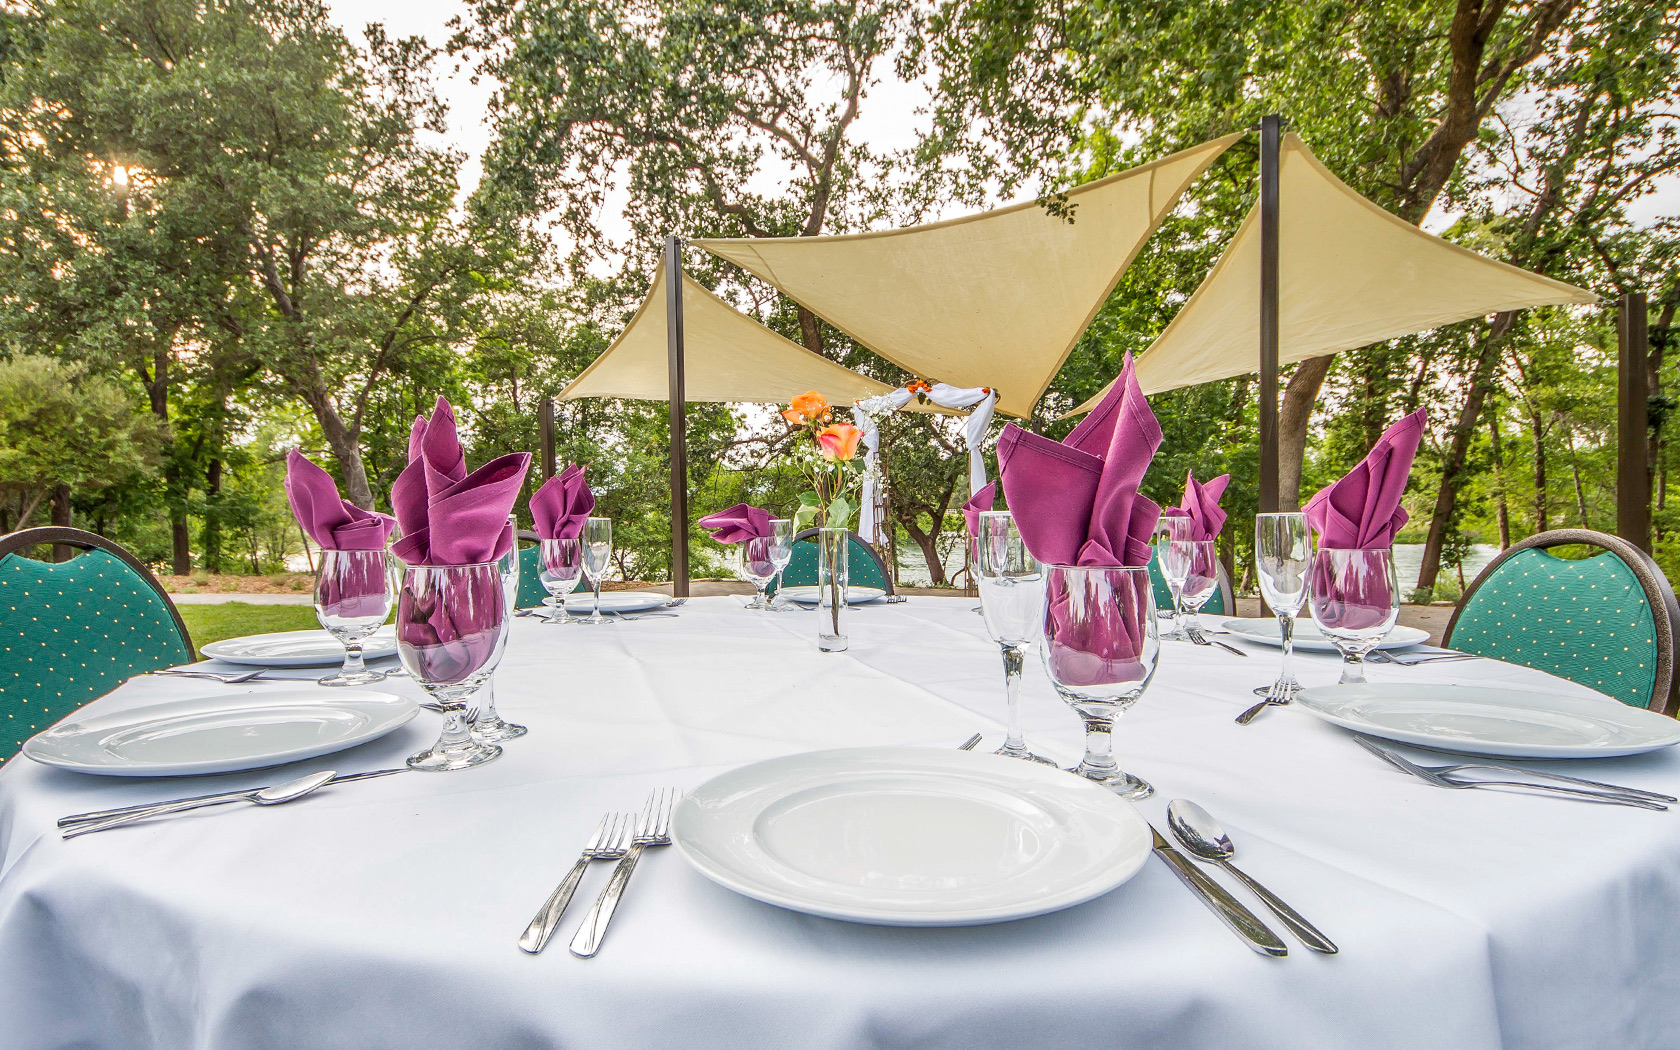 table outside set with plates, silverware, and glasses with napkins in them